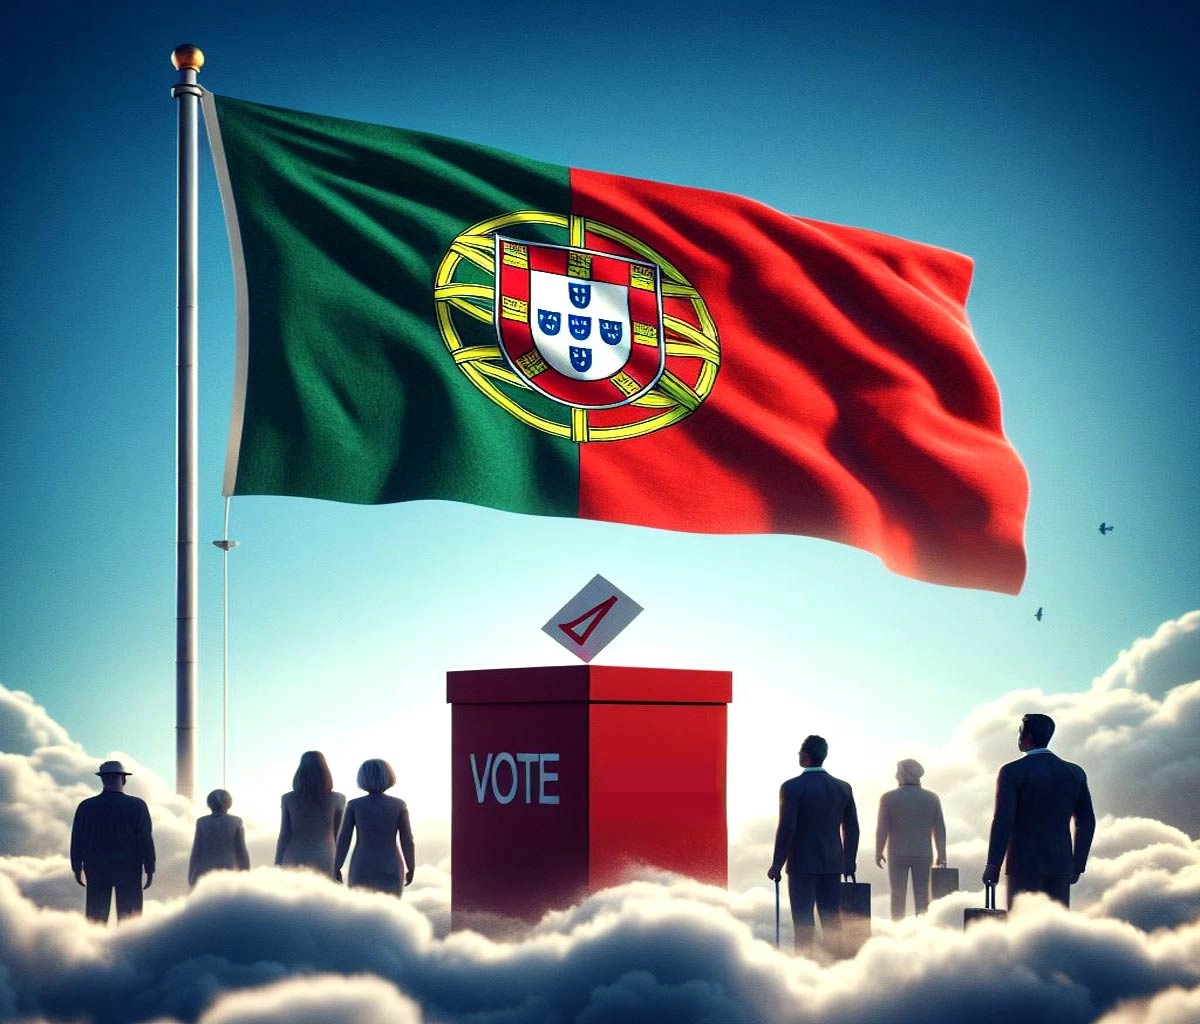 Good Luck In The Elections Today, Madeira!